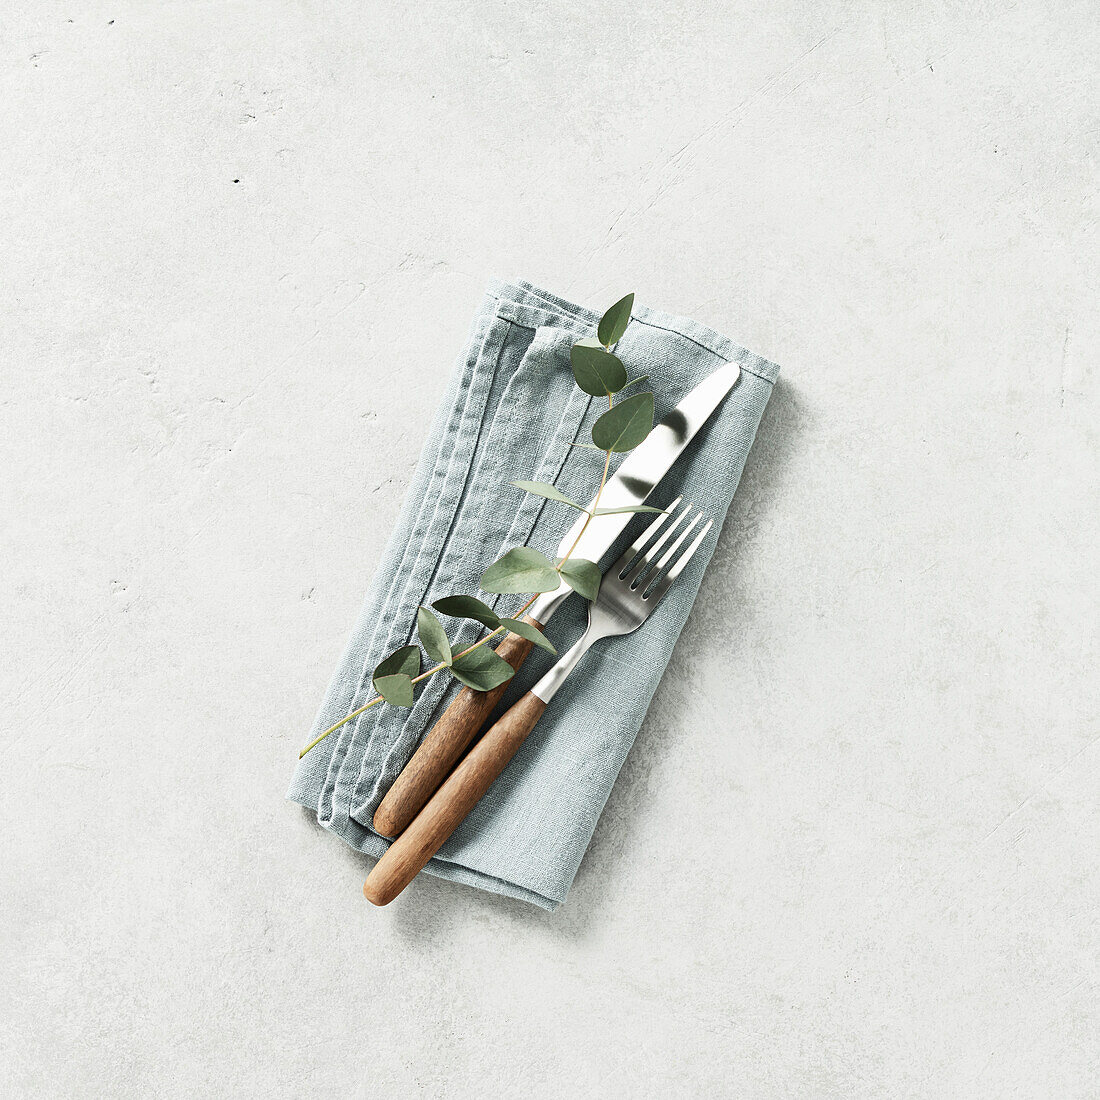 Table setting with linen napkin, fork, knife and eucalyptus on grey background square composition